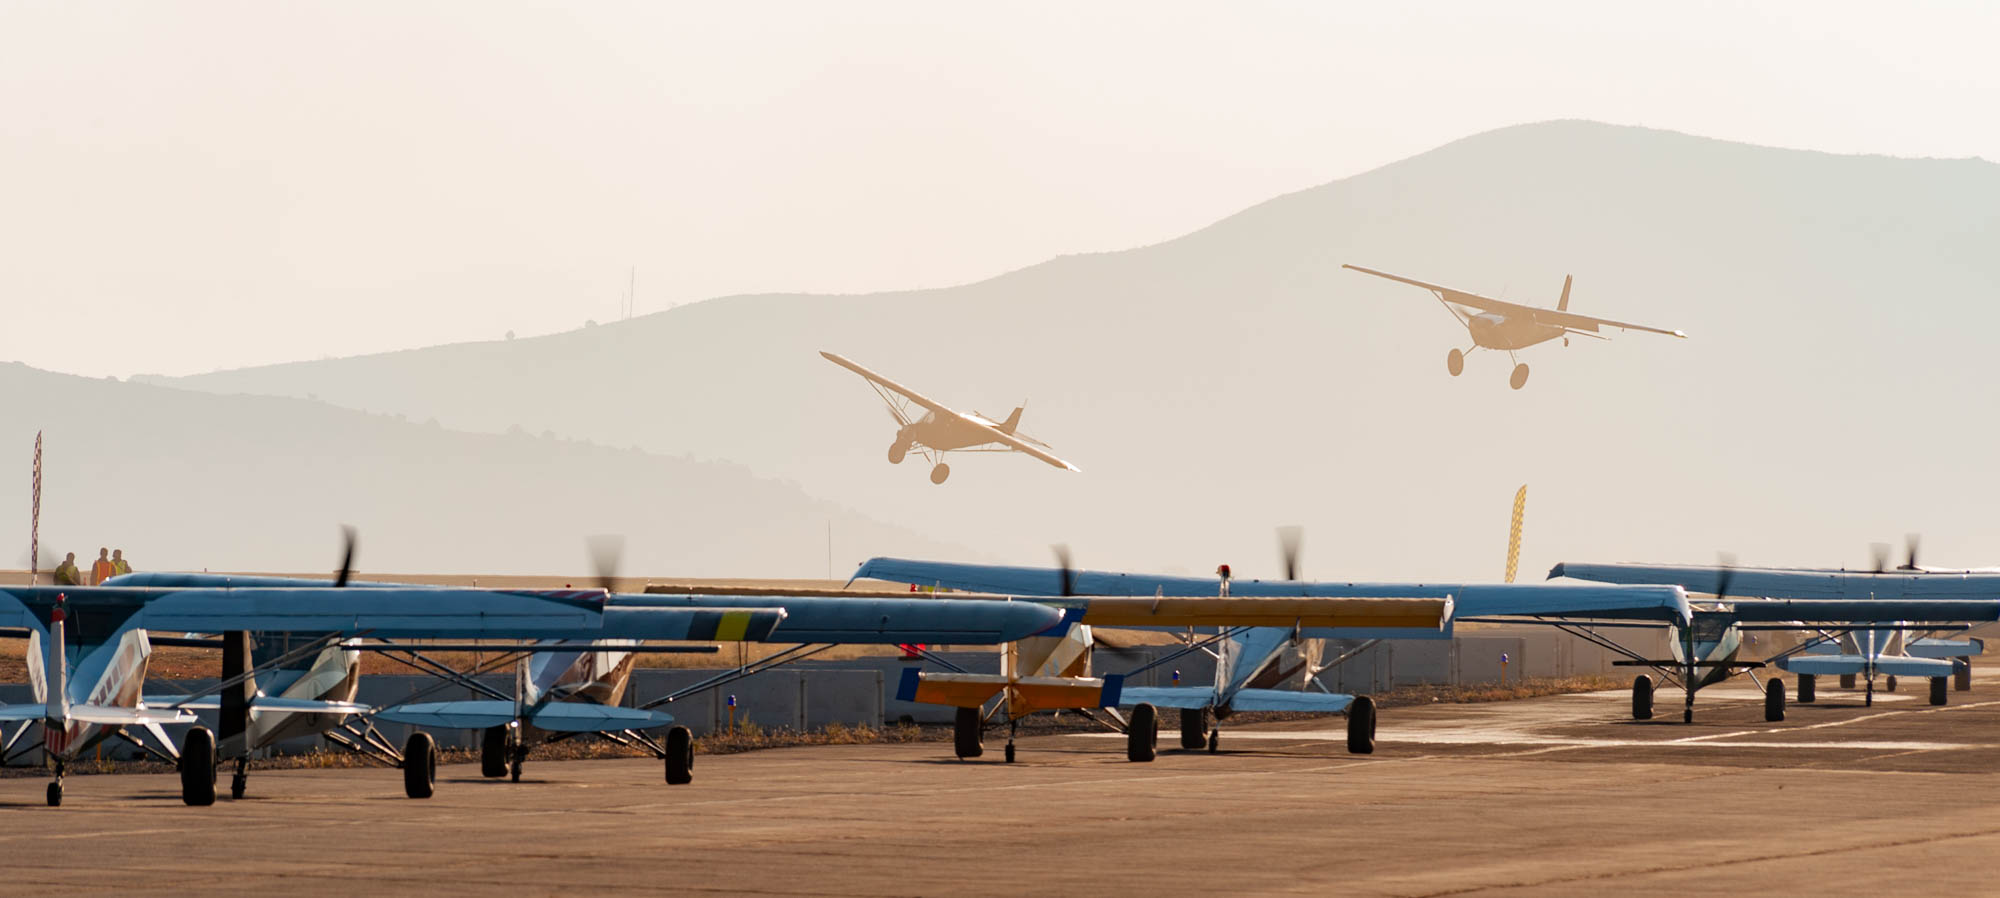 A number of STOL planes sit idling on the ramp at golden hour. Two STOL airplanes race against each other in the background, seen over the top of the idling planes.